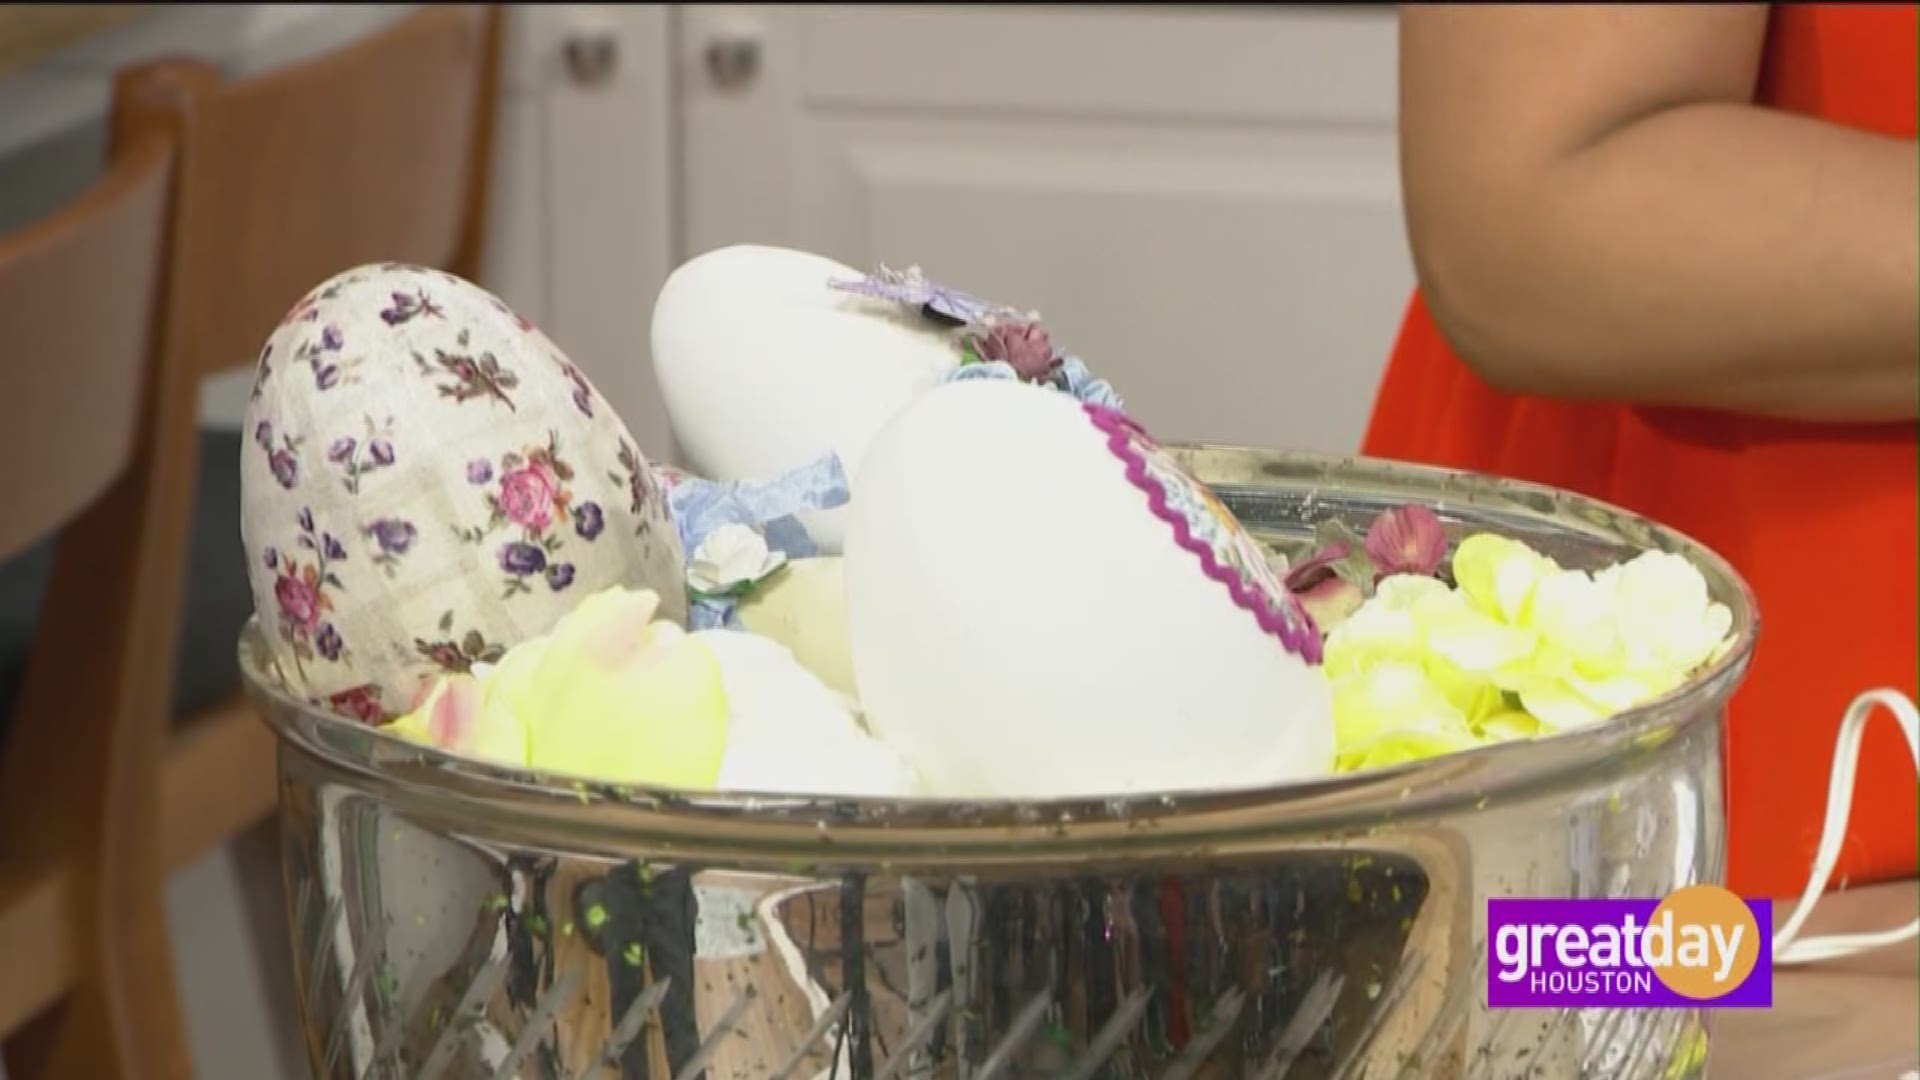 You can eat your eggs... Tie-dye your eggs... Or we have a better idea... Embellish your eggs!  This Easter, create a beautiful keepsake that your whole family can help with.  Amitha Verma with Village Antiques joined Great Day Houston to show us how to make eggs we won't want to hide.